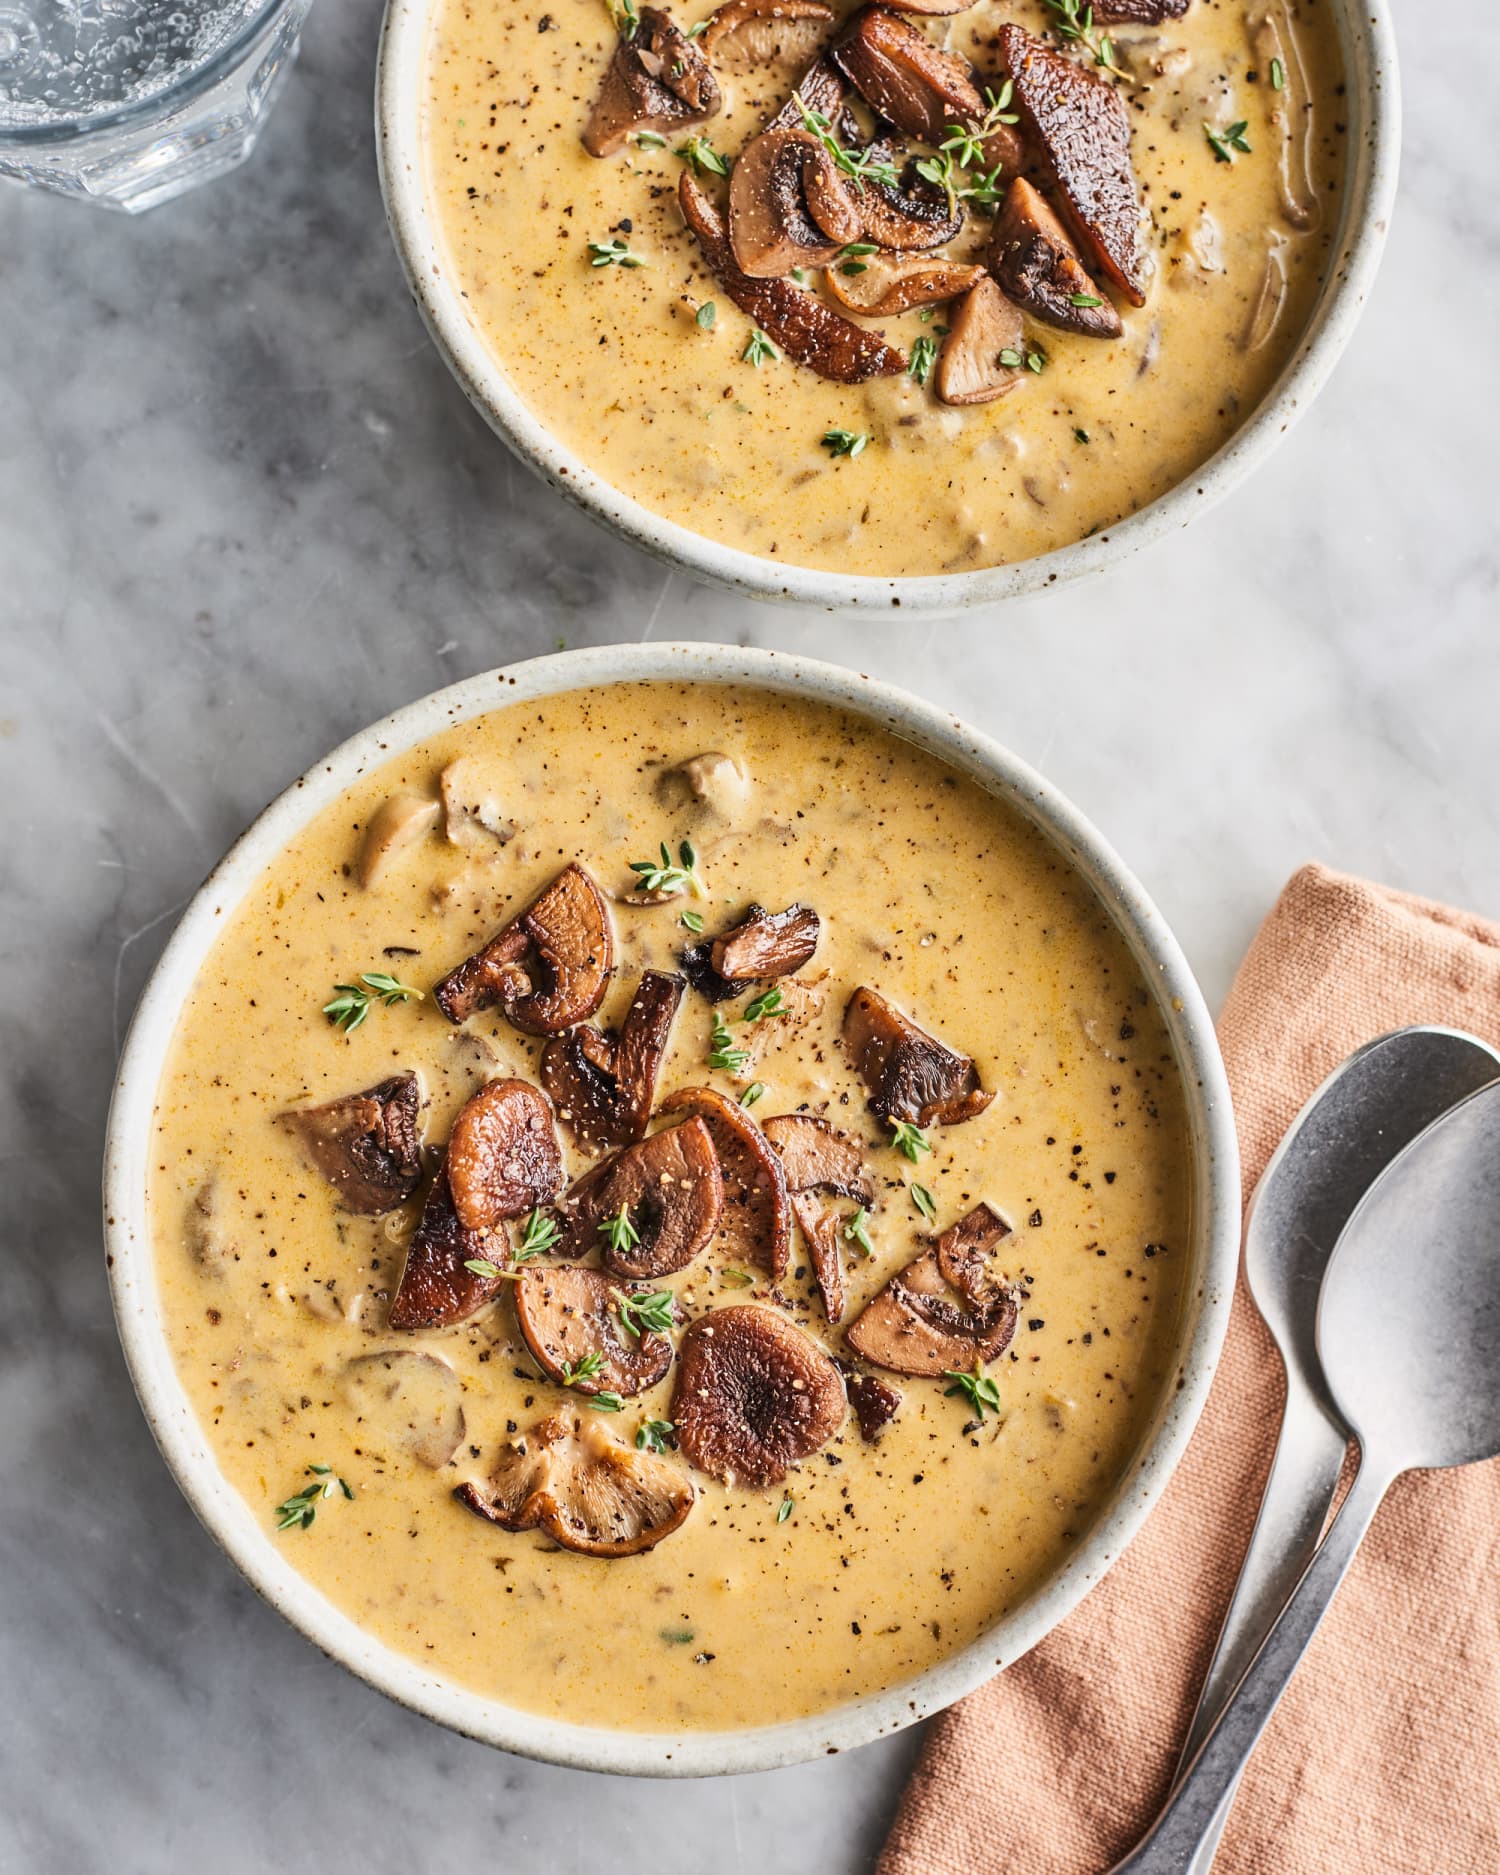 This Creamy Mushroom Soup Is Deeply Satisfying